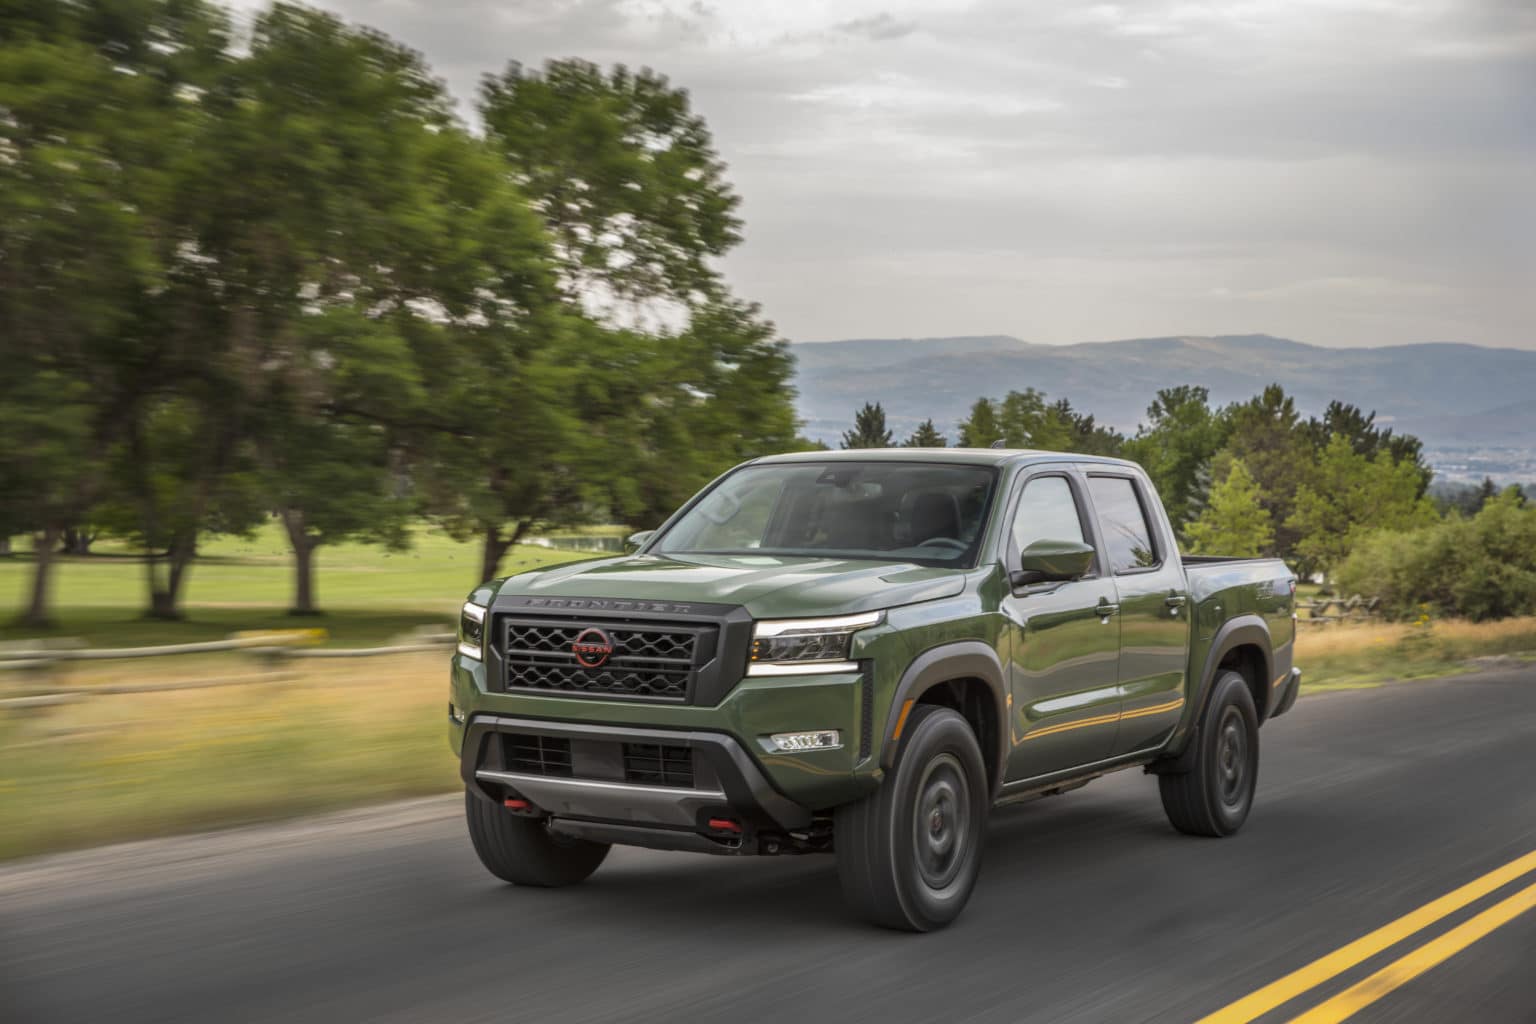 2022 Frontier is a worthy successor to the Nissan compact pickup legacy